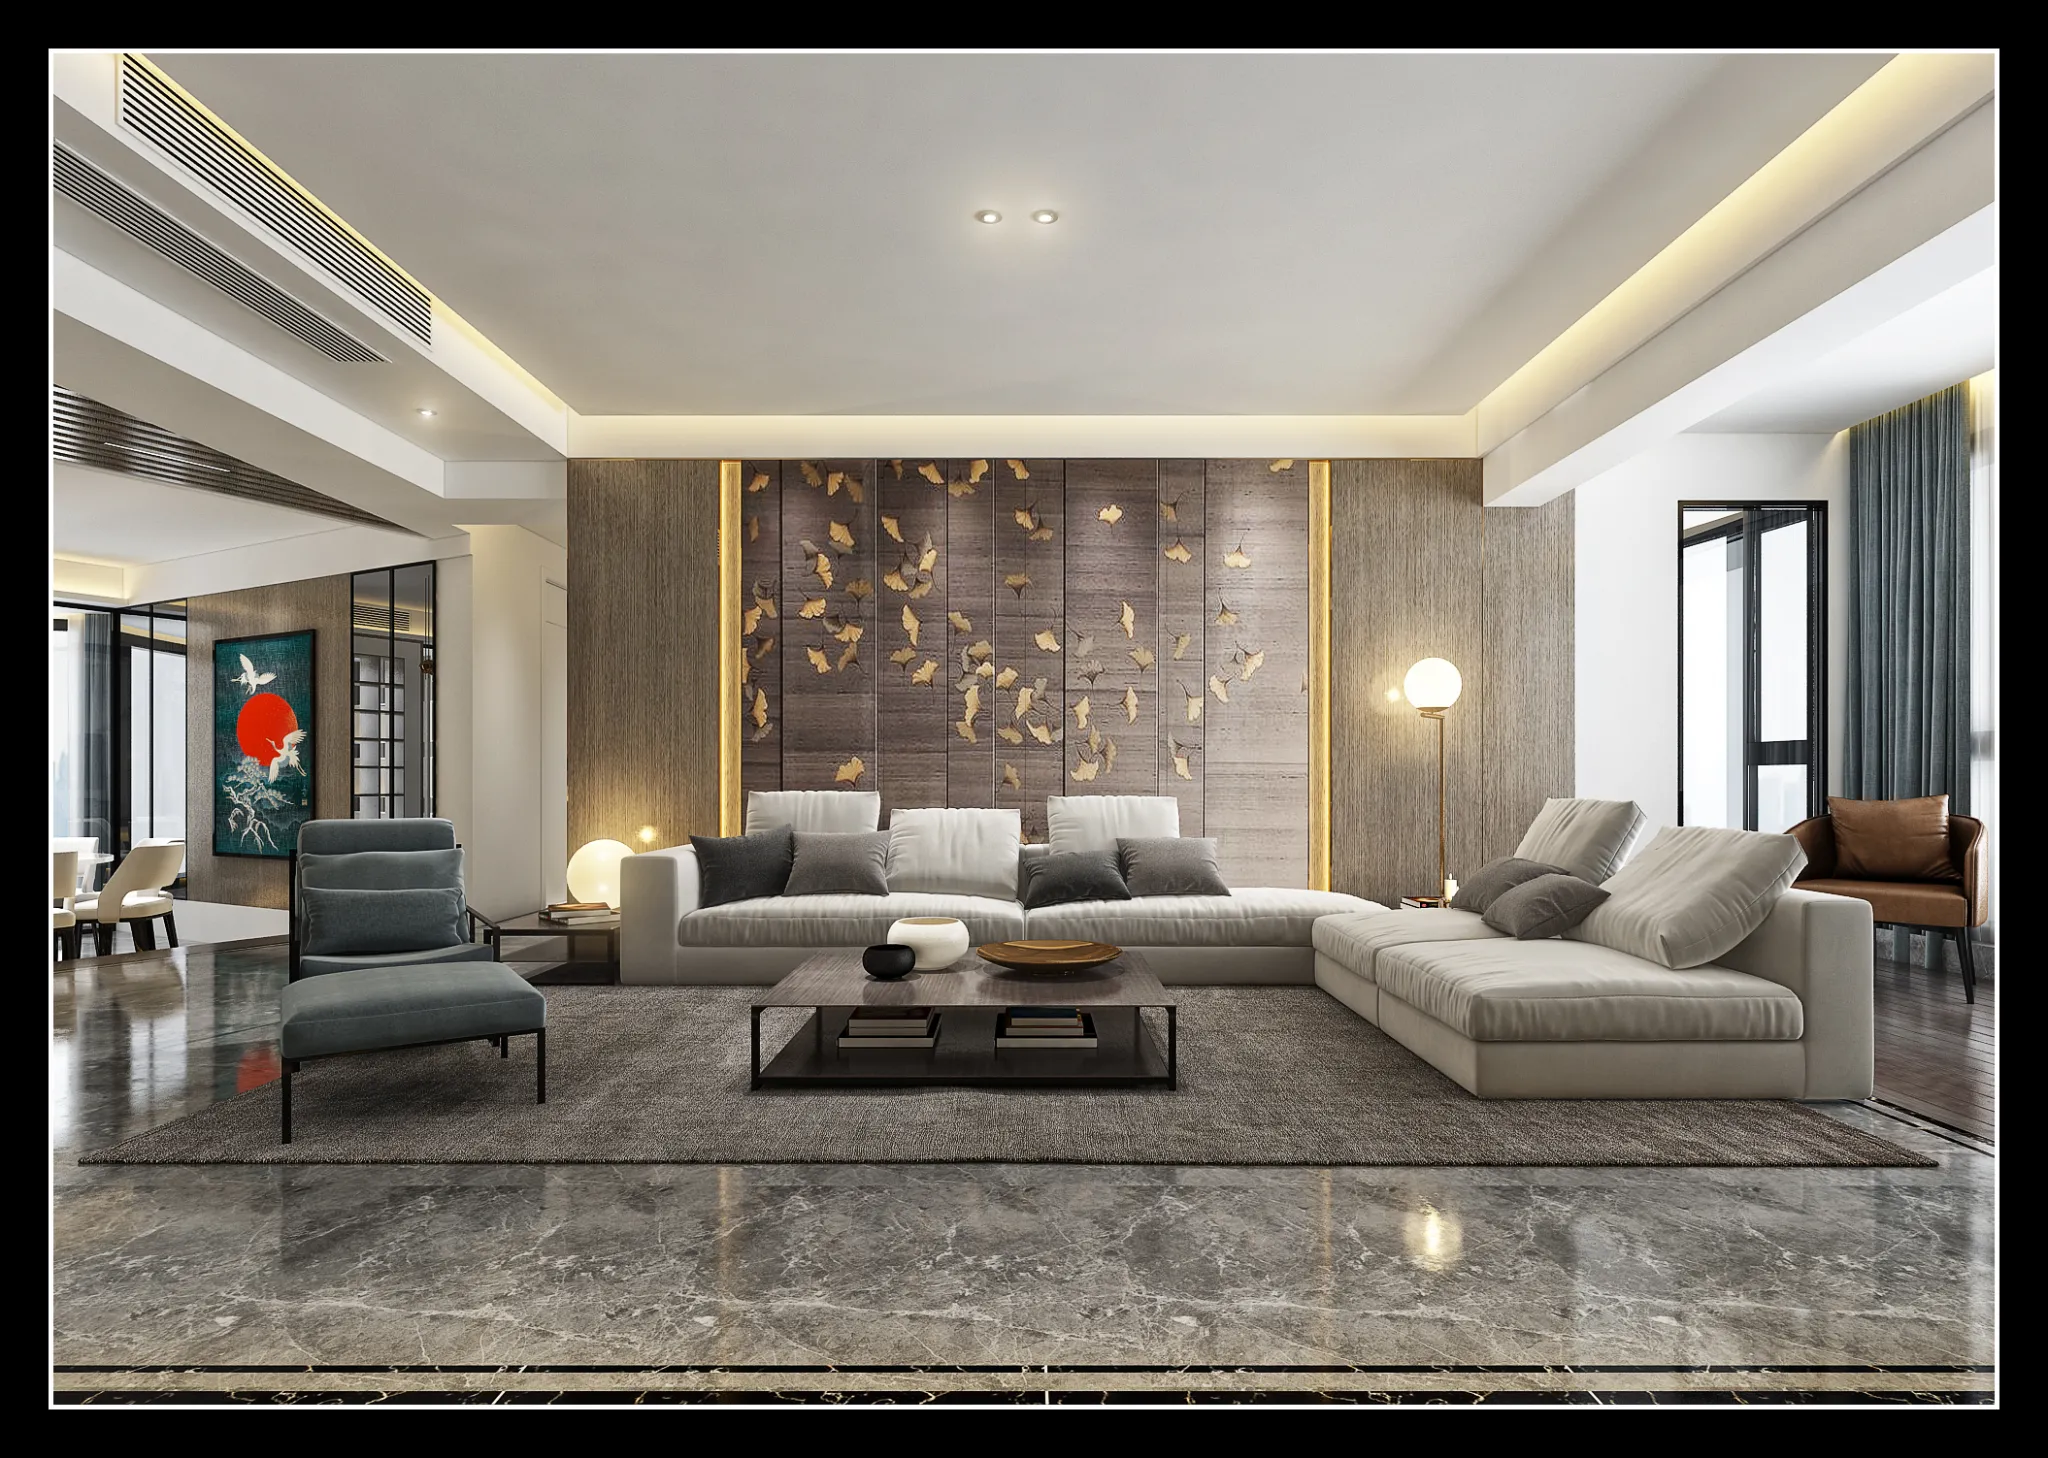 DESMOD INTERIOR 2021 (VRAY) – 4. LIVING ROOM – CHINESE – 081